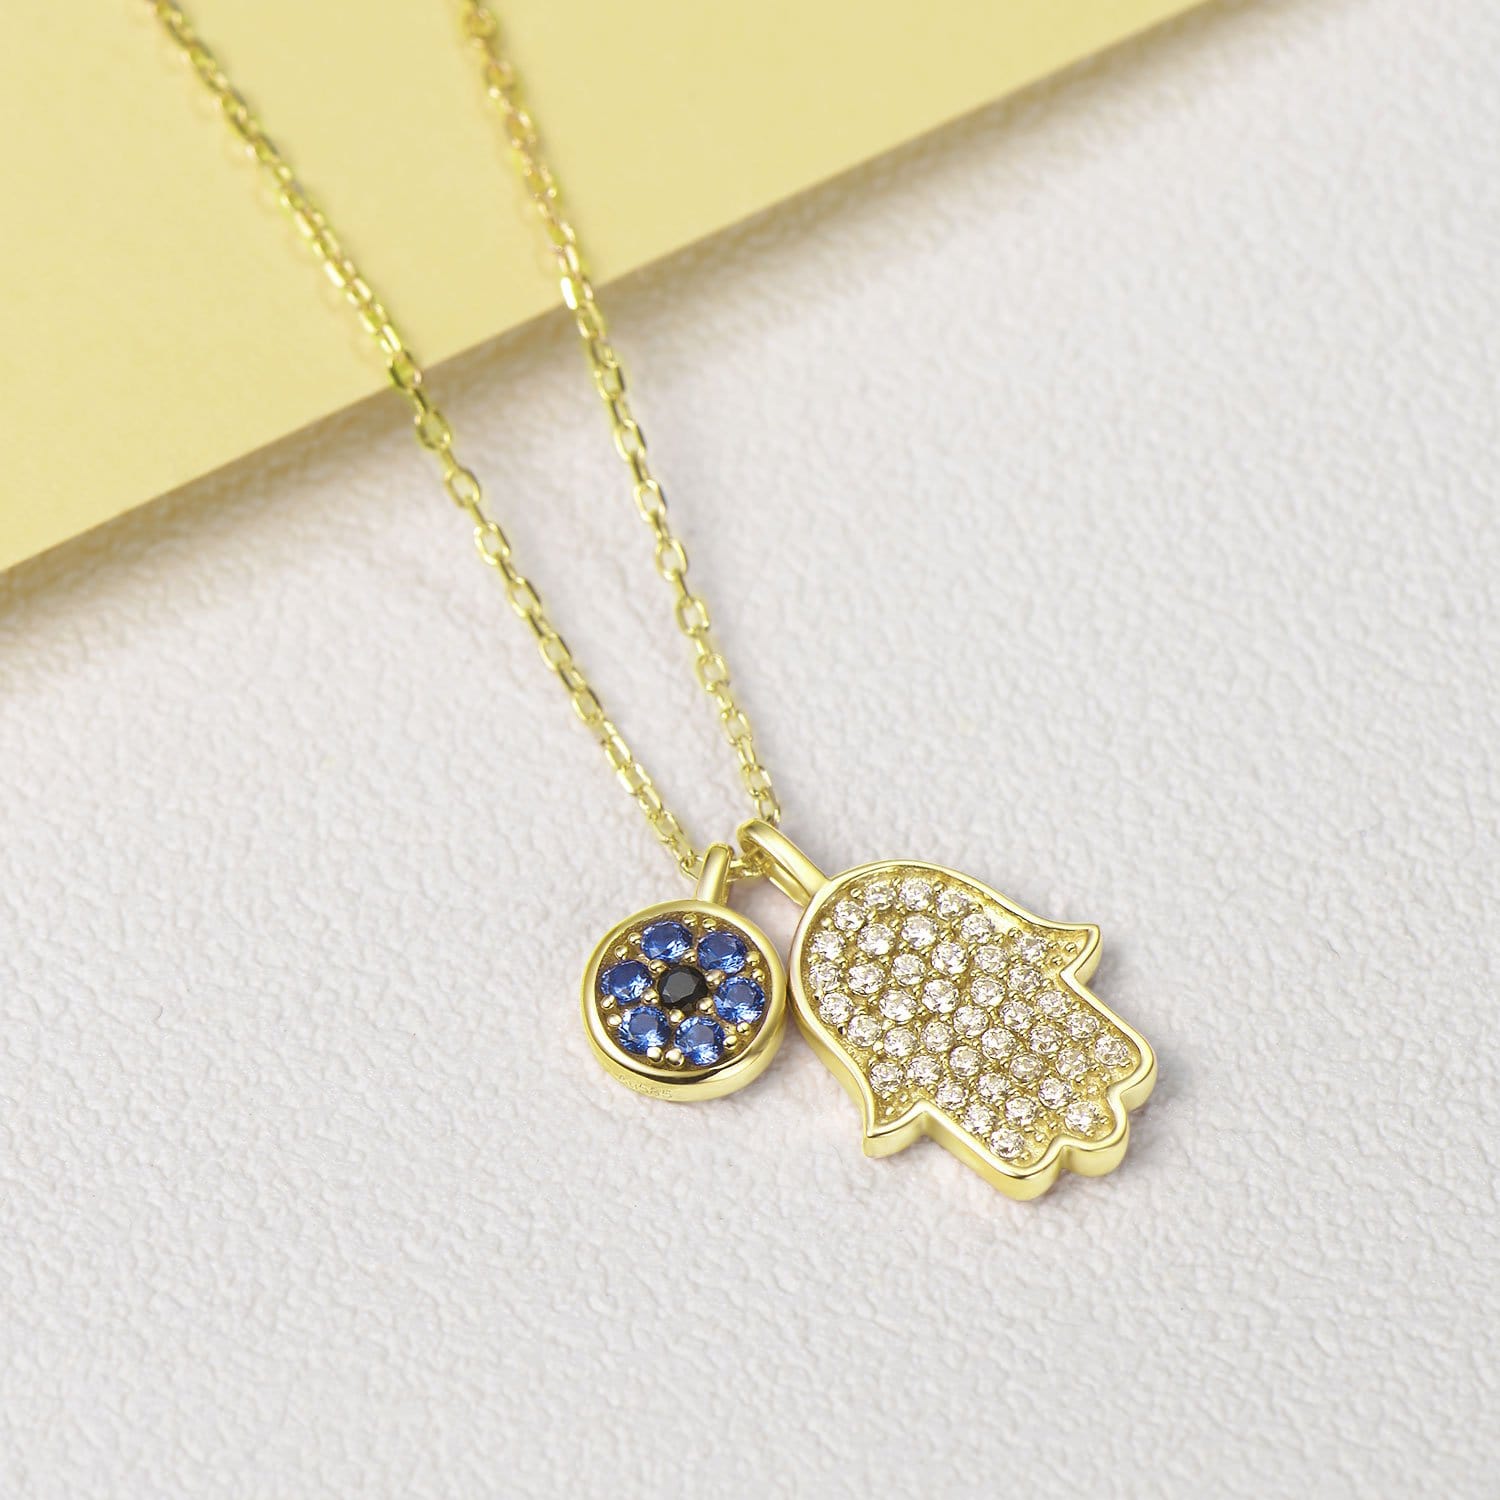 Paved stone hamsa blue evileye necklace gift with jewelry box